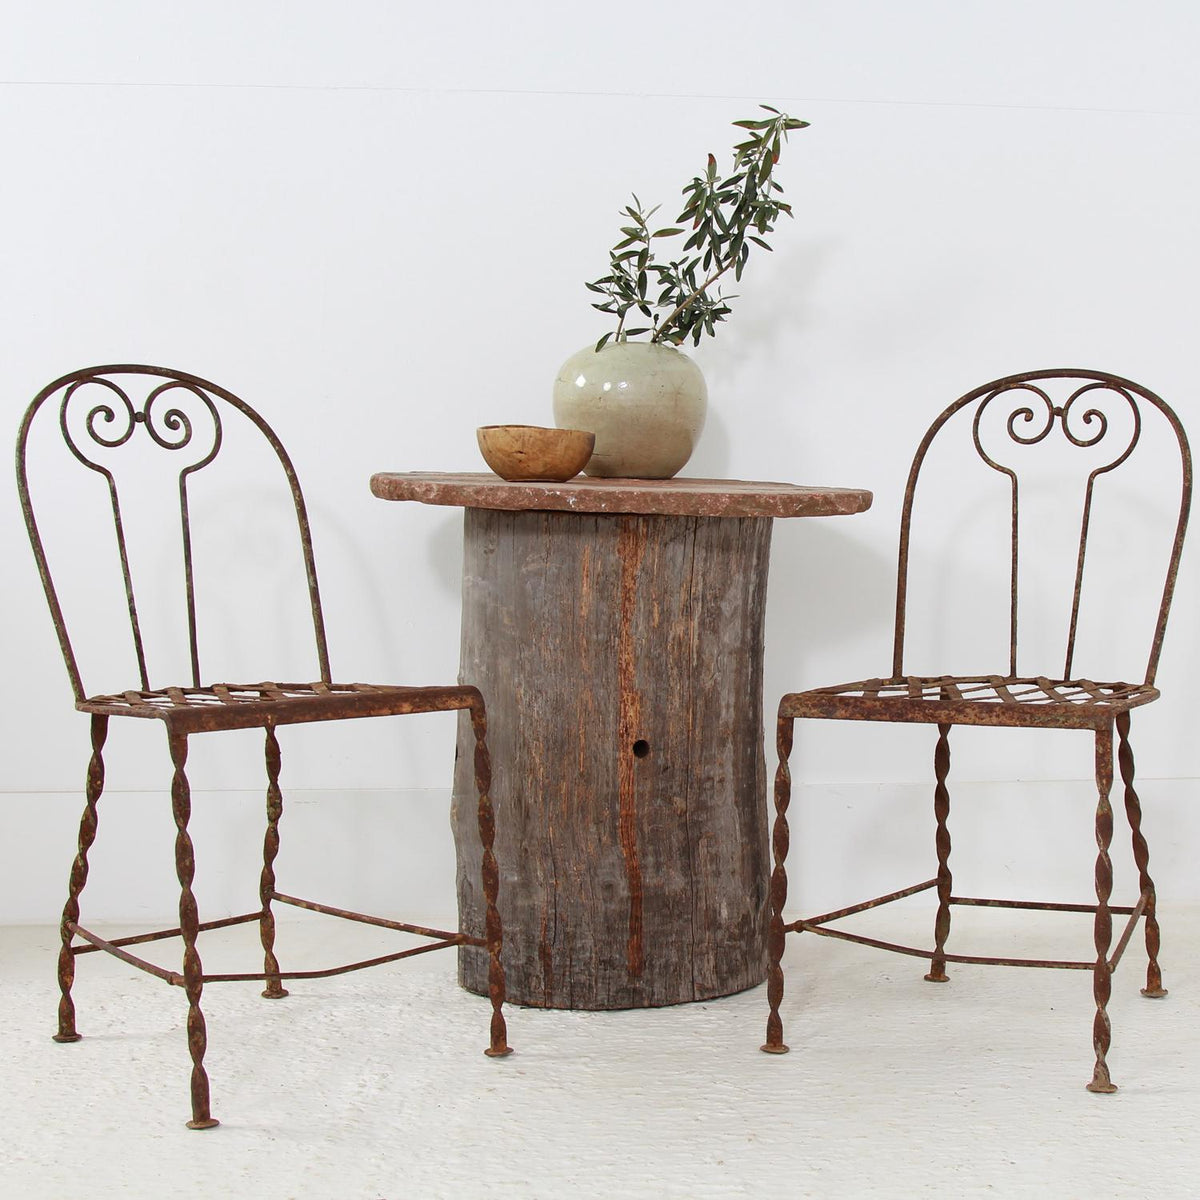 Beautiful Pair of French Wrought Iron Garden Chairs